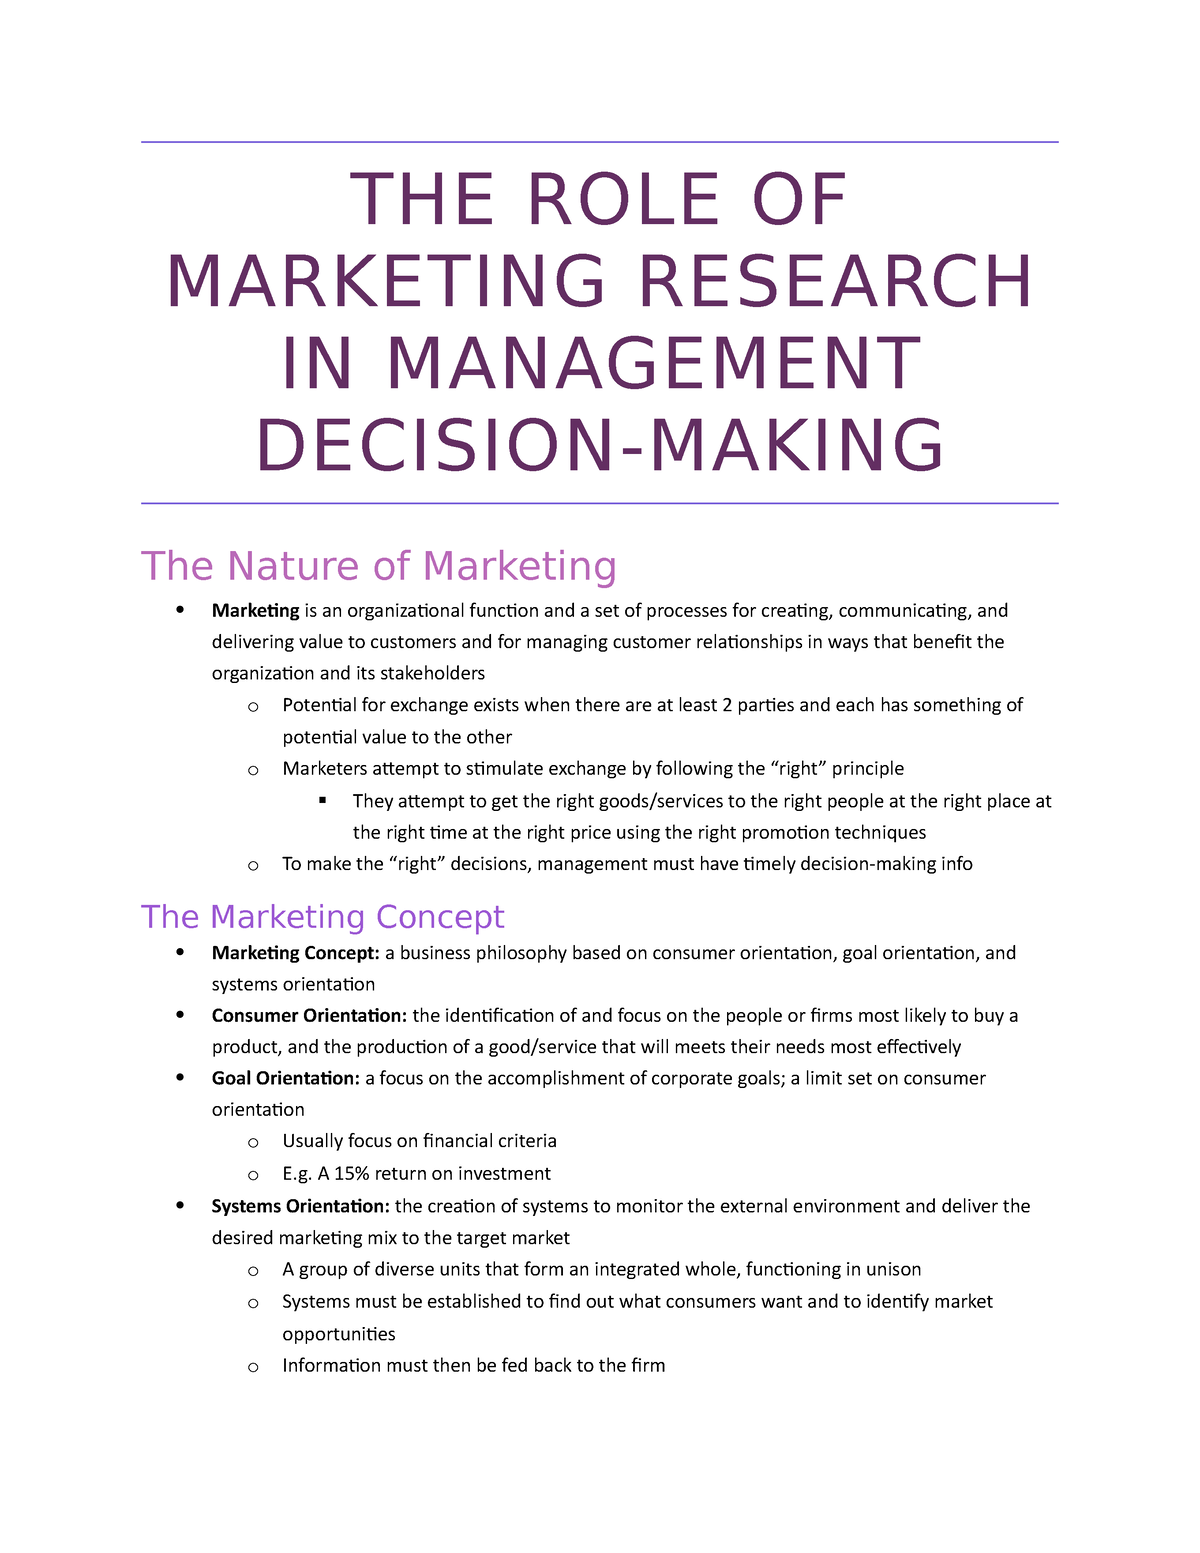 role of marketing research in decision making pdf